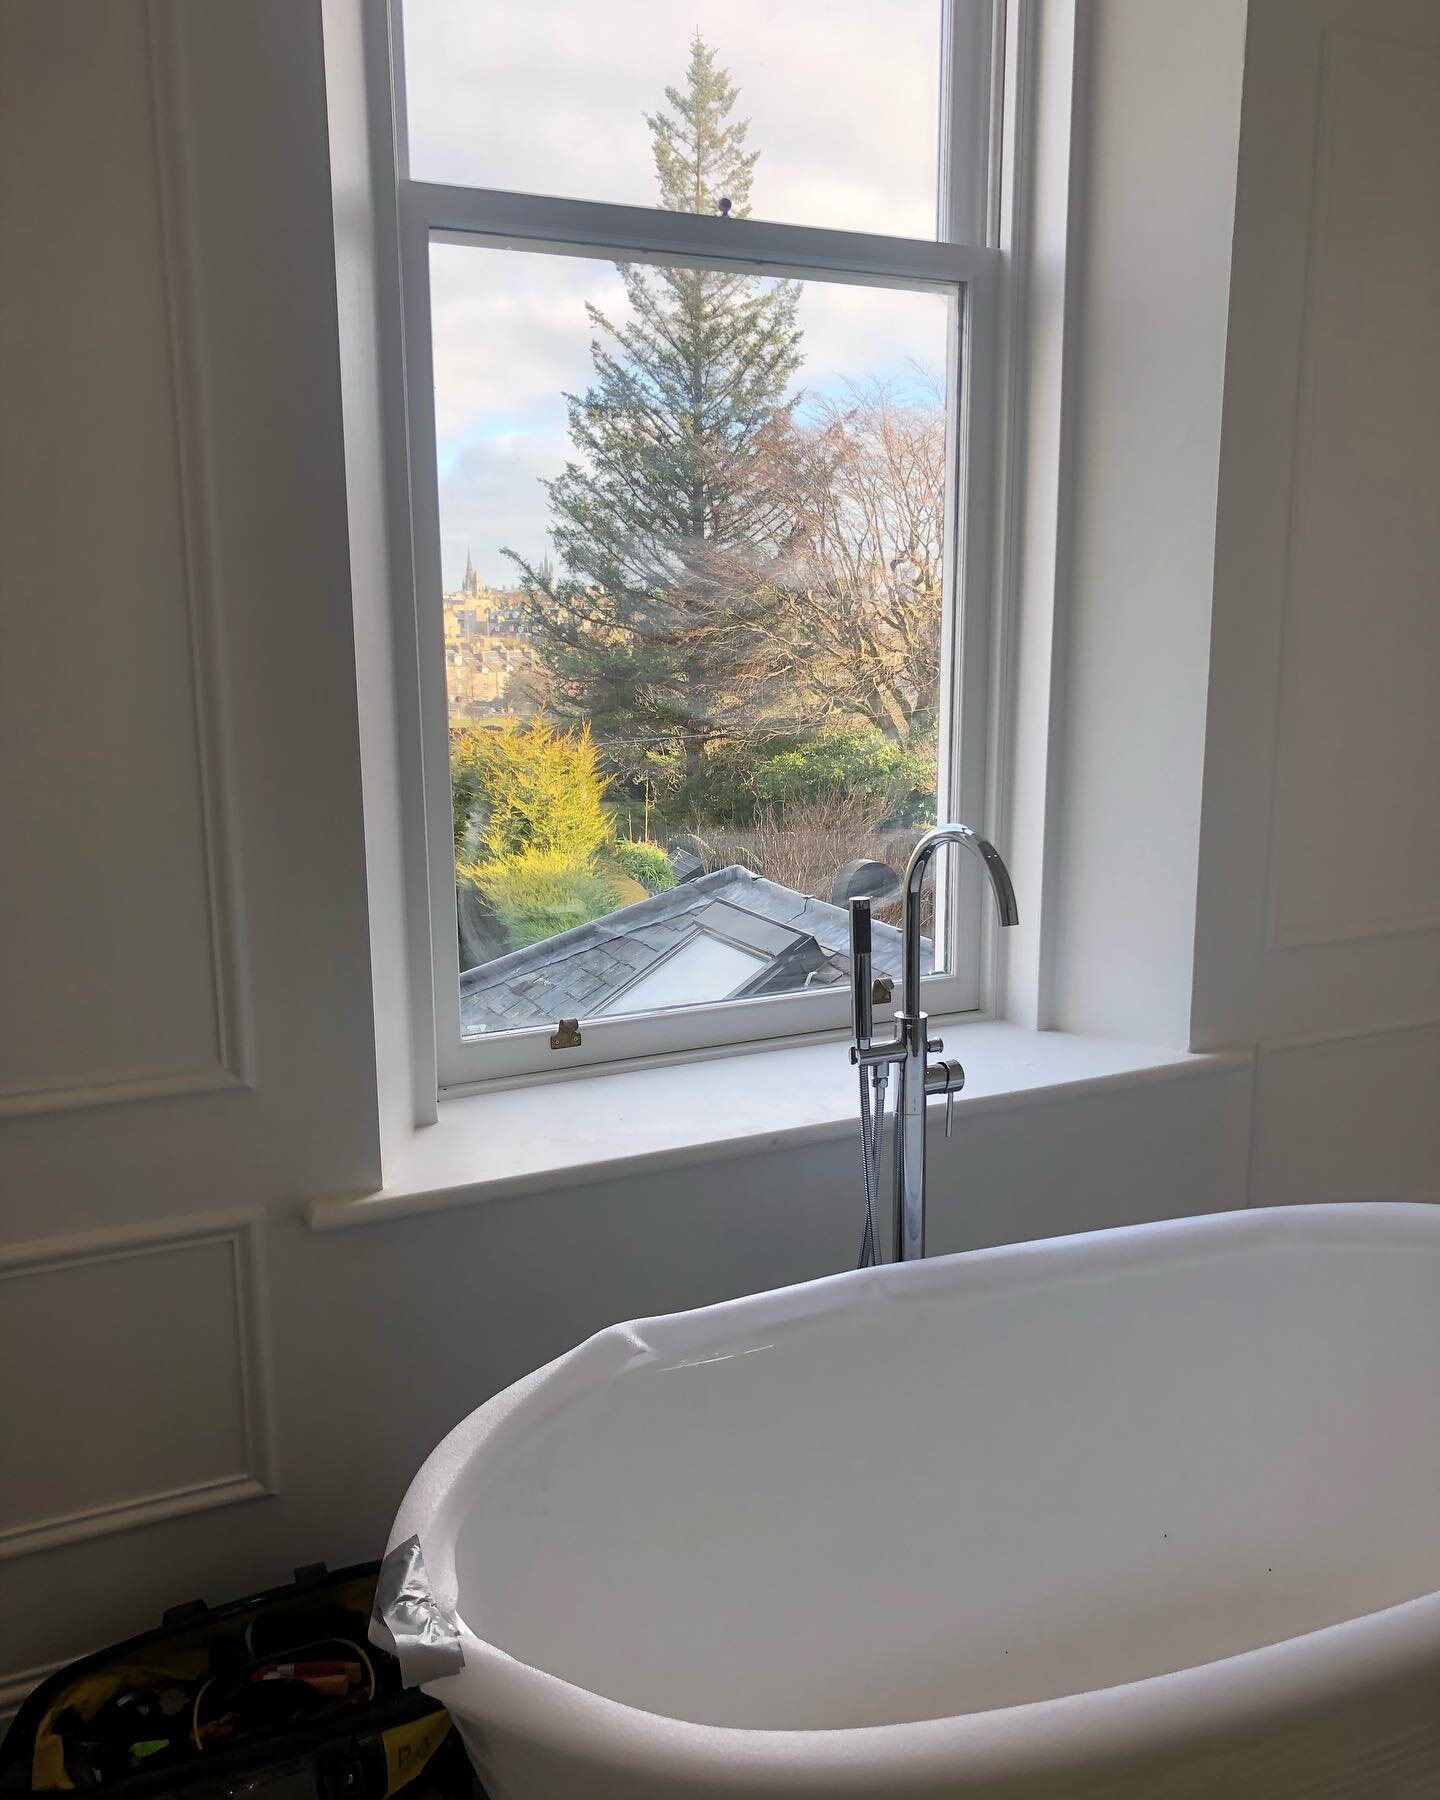 Final finishes coming together on site, phase one of our project in Aberdeen nearly complete! Bathroom fittings from @lussostone.
 
#homerenovation #homerenovationuk #homedesign #bathroomdecor #periodhome #architect #aberdeenscotland #homedesign #hom